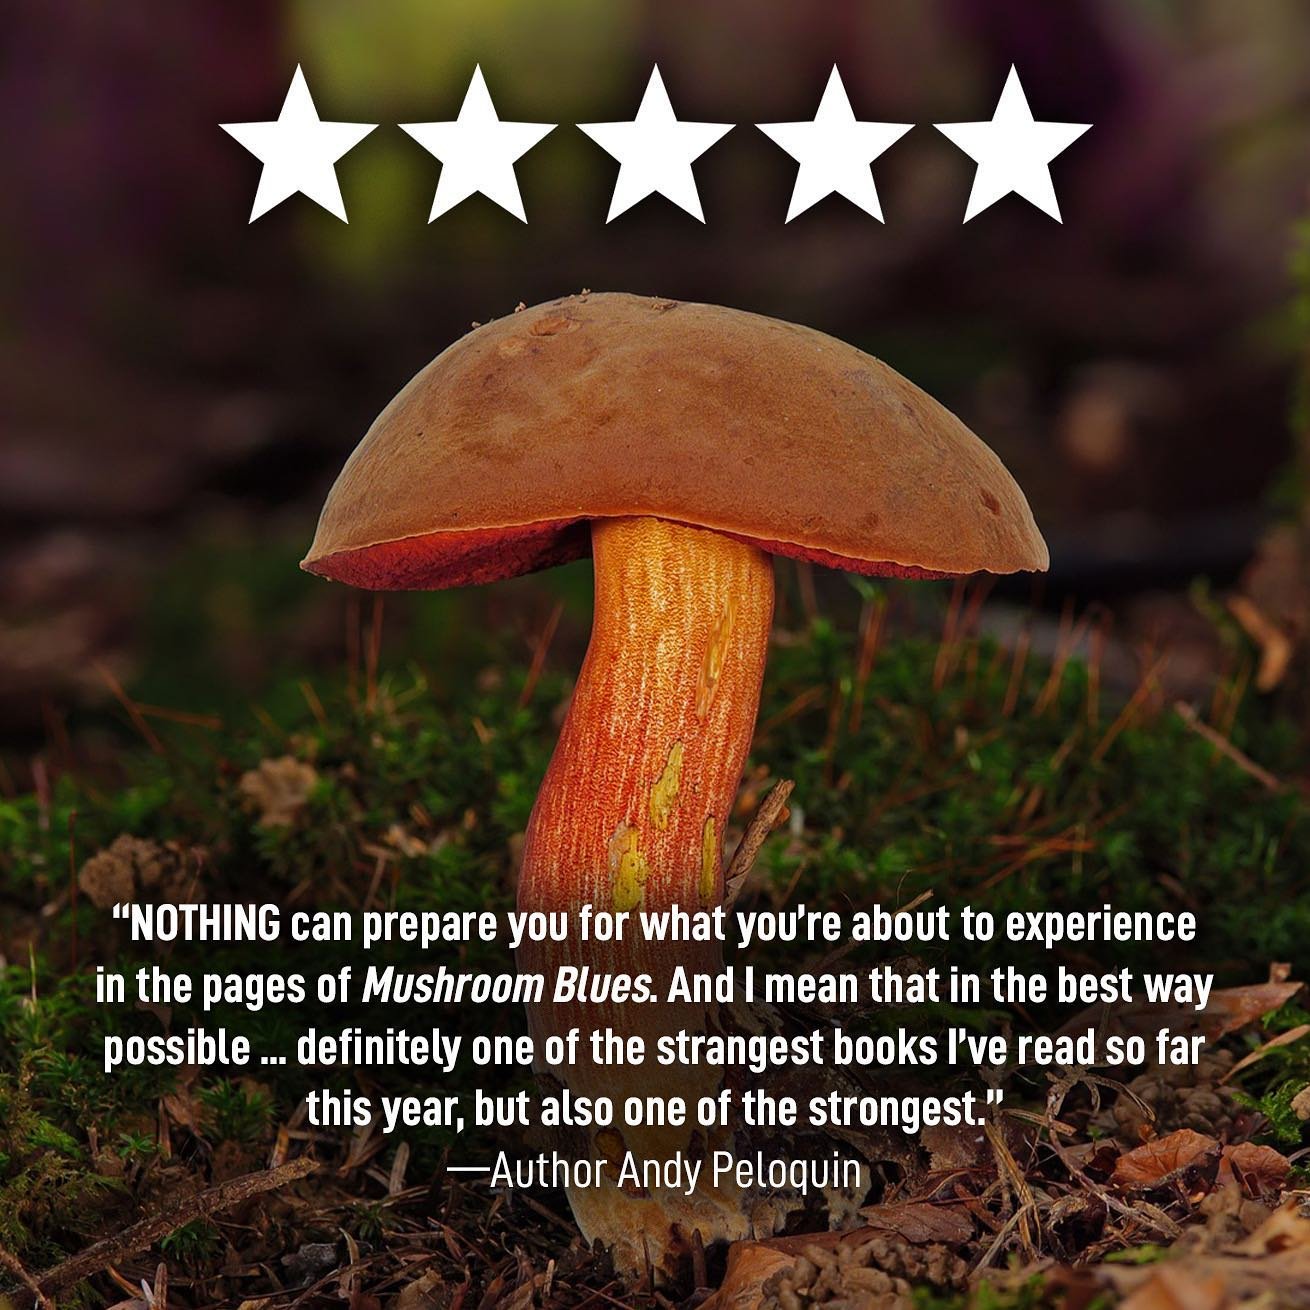 Despite being intimidatingly tall, @andypeloquinauthor has heaped nothing but praise on my debut novel, #MushroomBlues. Thank you for all of the support, my friend 🍄💙

BUY IT TODAY in paperback/hardcover/eBook on Amazon or read it FREE on Kindle Un